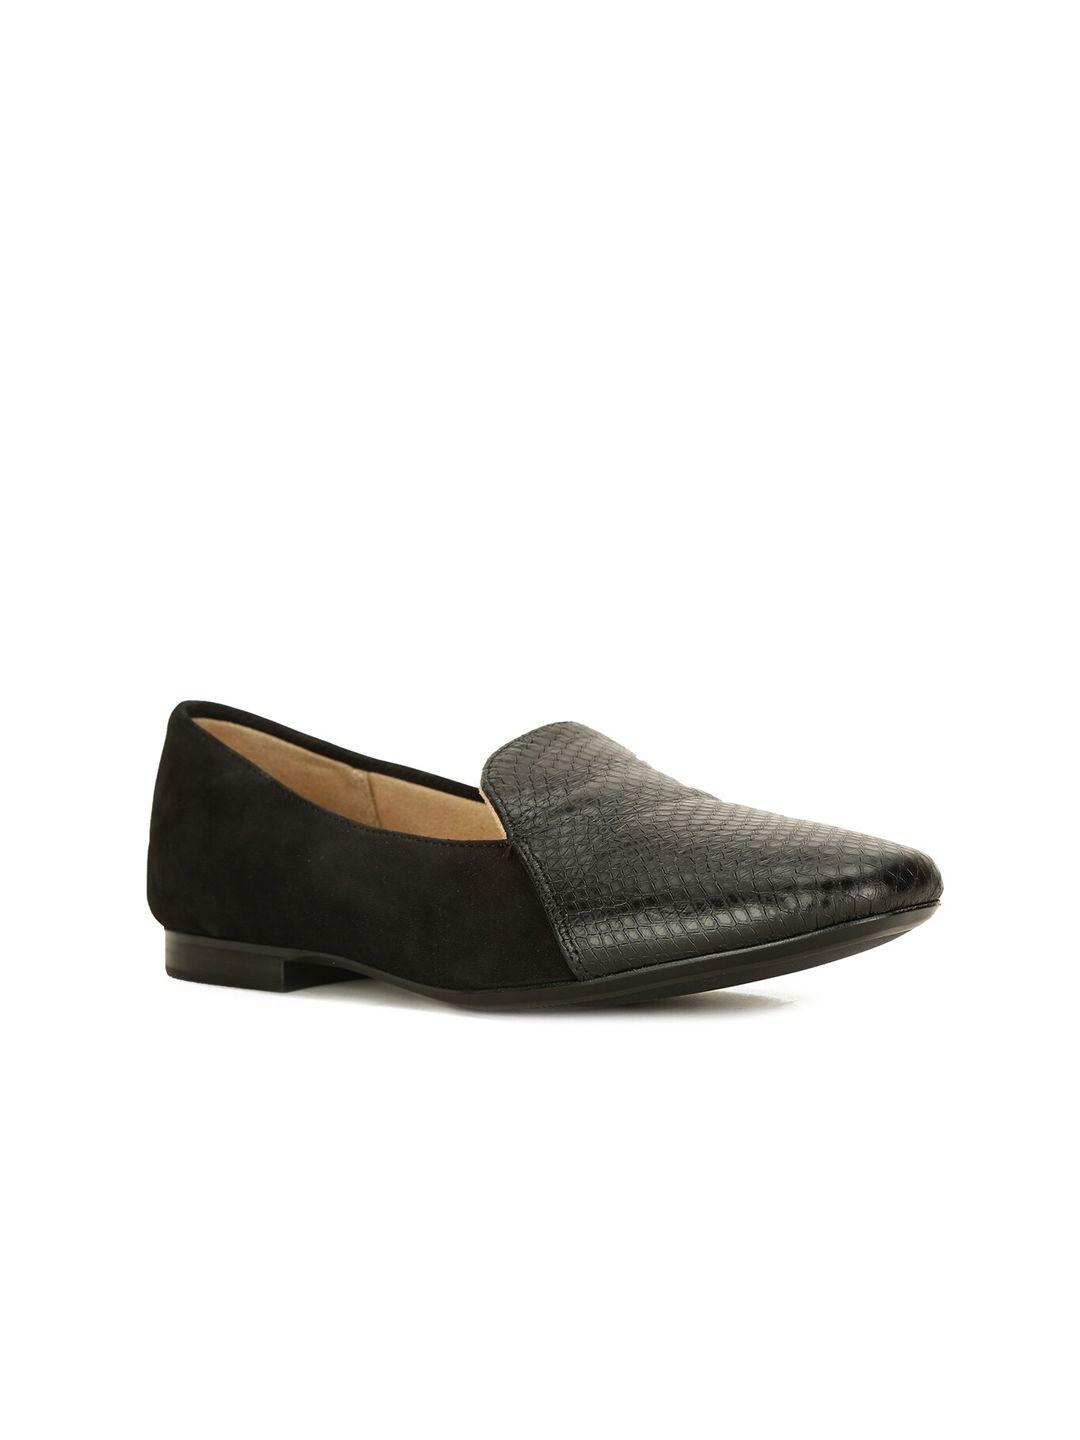 naturalizer-women-black-woven-design-leather-loafers